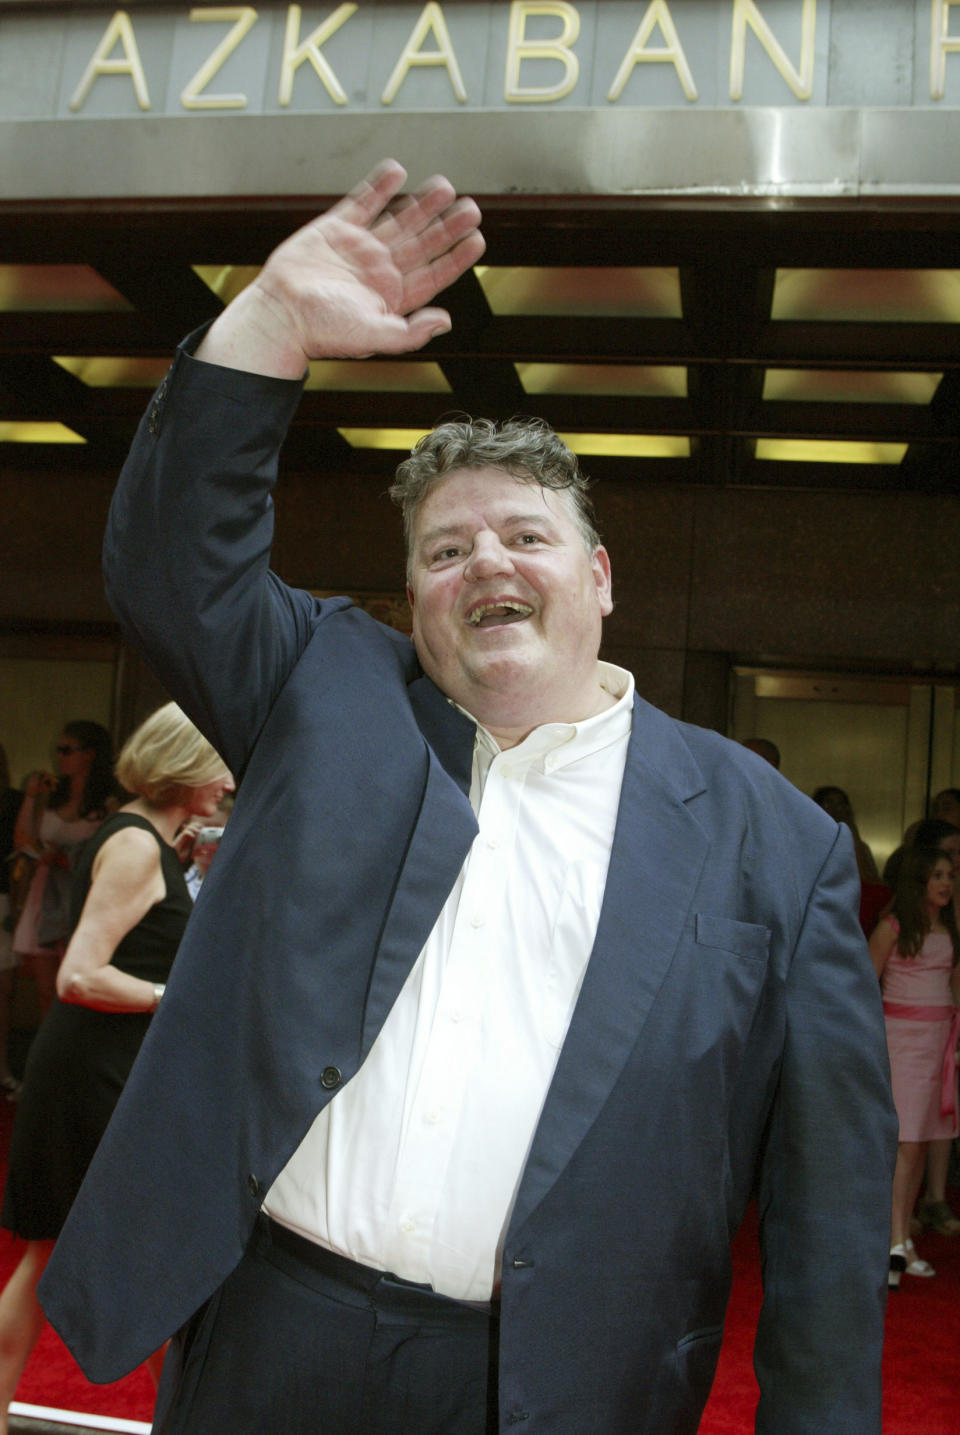 FILE - Robbie Coltrane walks the red carpet during the New York premiere of "Harry Potter and the Prisoner of Azkaban" Sunday, May 23, 2004. Scottish actor Robbie Coltrane, who played a forensic psychologist on TV series “Cracker” and the giant Hagrid in the “Harry Potter” movies, has died. He was 72. Coltrane’s agent Belinda Wright said he died Friday Oct. 14, 2022, at a hospital in Scotland. (AP Photo/Diane Bondareff, File)